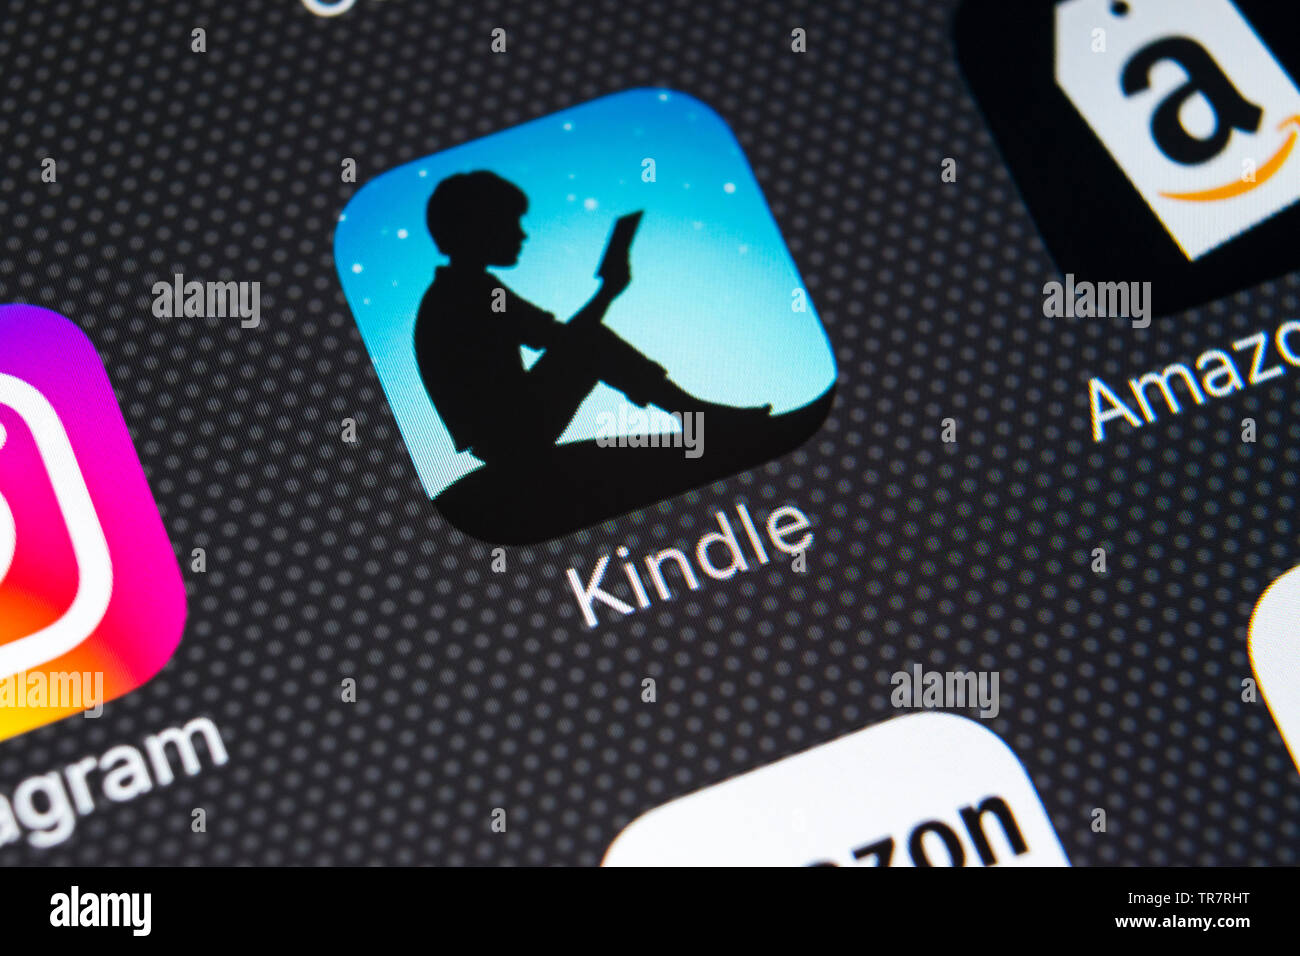 Sankt-Petersburg, Russia, February 21, 2018: Amazon Kindle application icon on Apple iPhone X screen close-up. Amazon Kindle app icon. Amazon kindle a Stock Photo